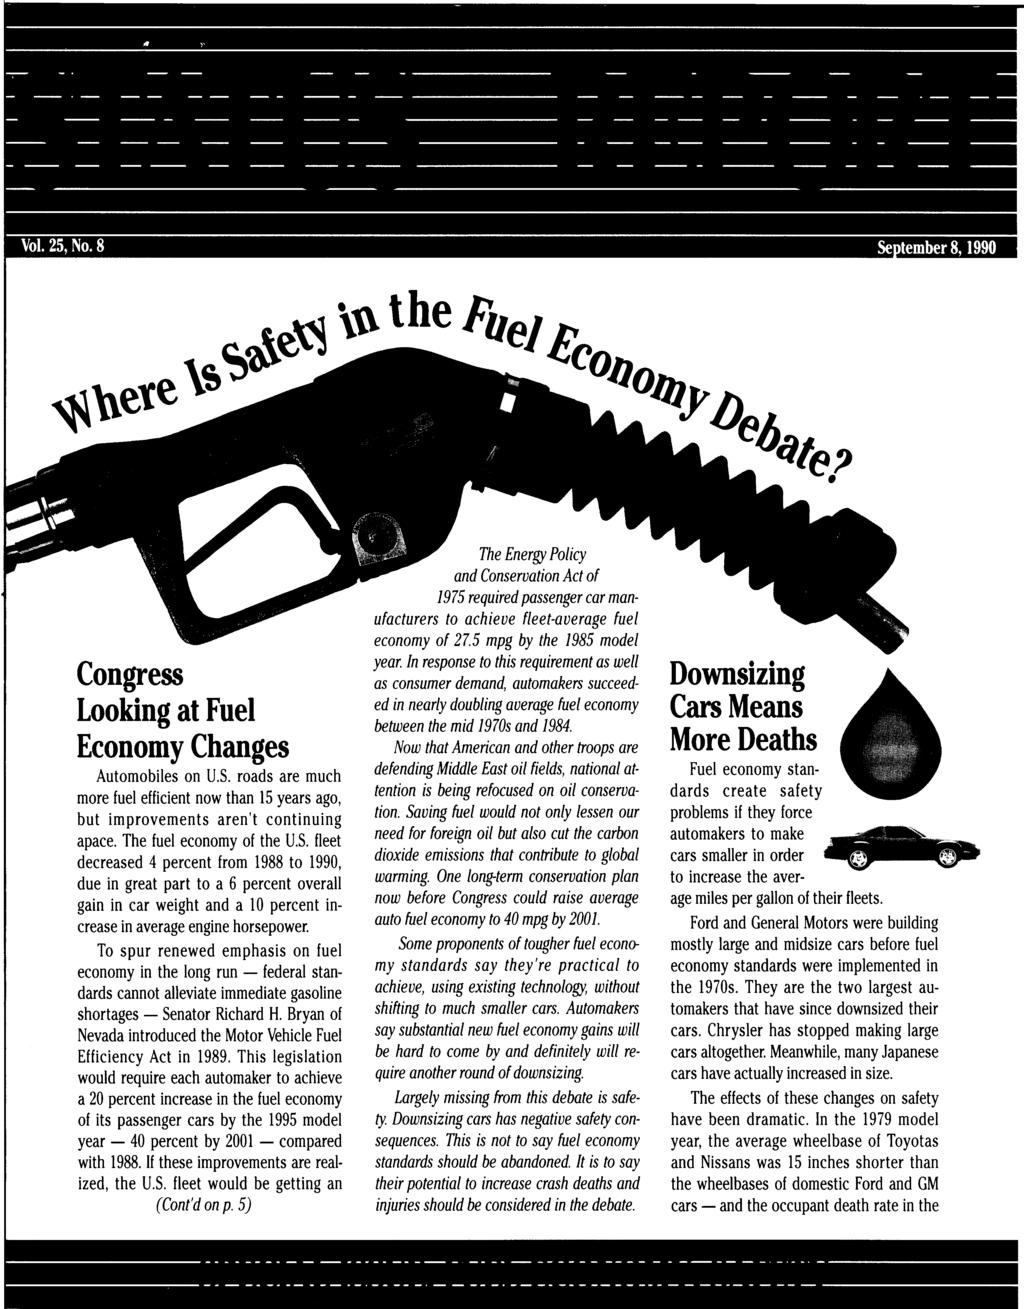 Vol. 25, No. 8 Septembers, 1990 Congress Looking at Fuel Economy Changes Automobiles on U.S. roads are much more fuel efficient now than 15 years ago, but improvements aren't continuing apace.